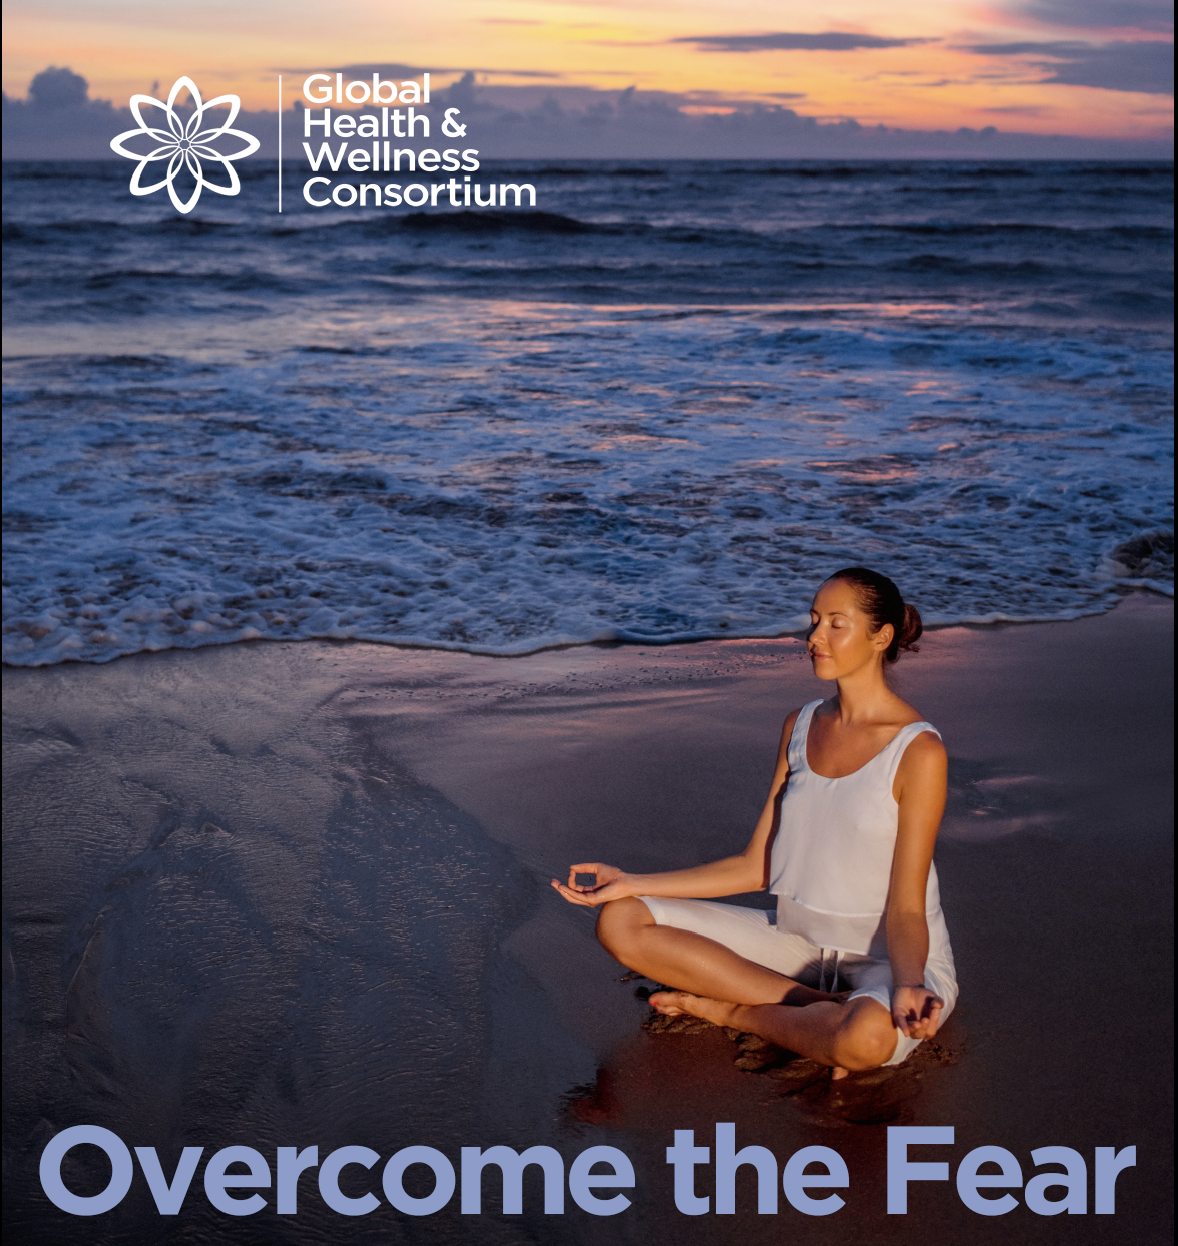 Overcoming the Fear